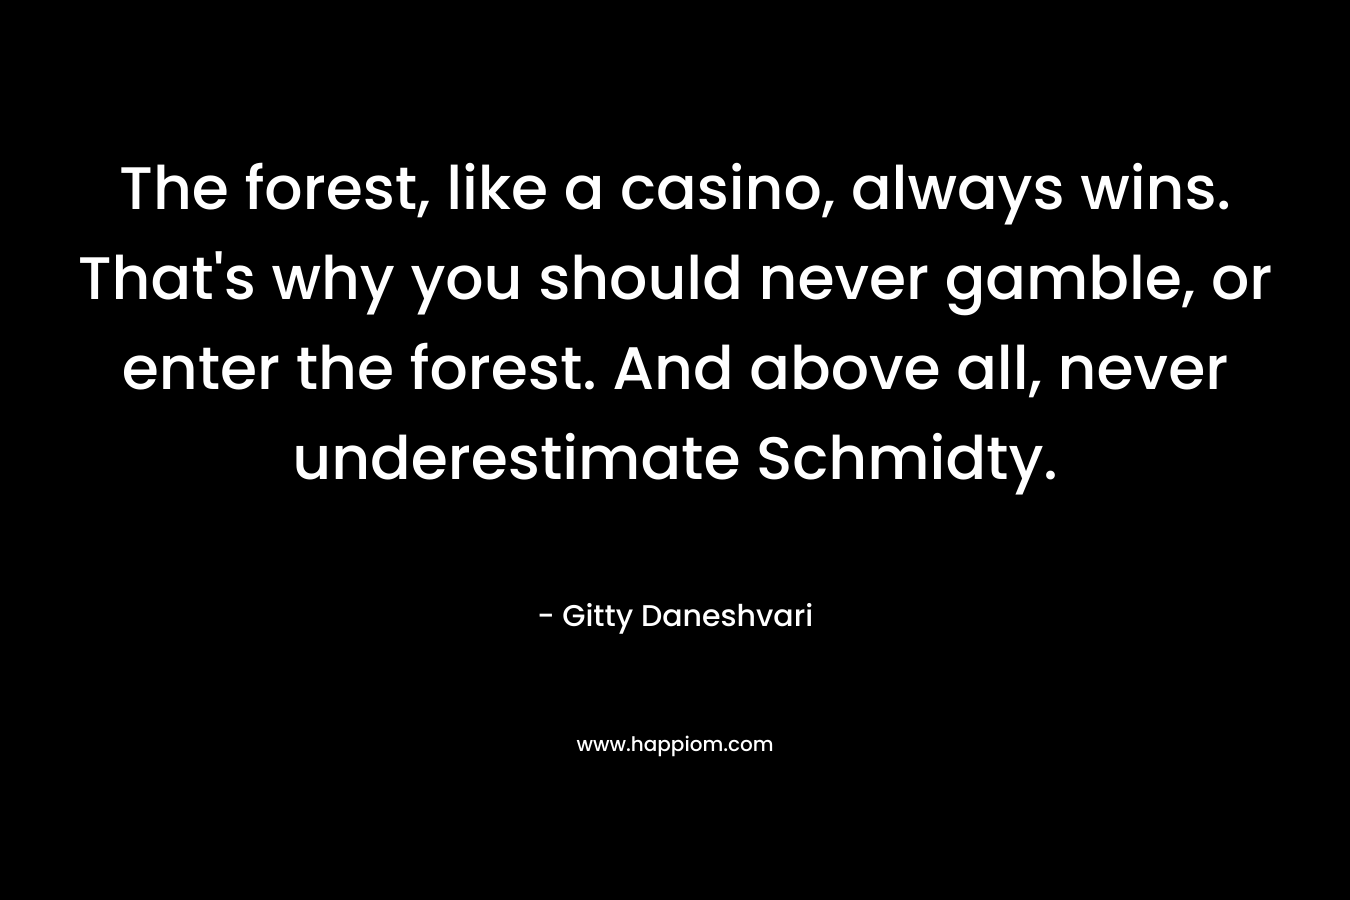 The forest, like a casino, always wins. That’s why you should never gamble, or enter the forest. And above all, never underestimate Schmidty. – Gitty Daneshvari